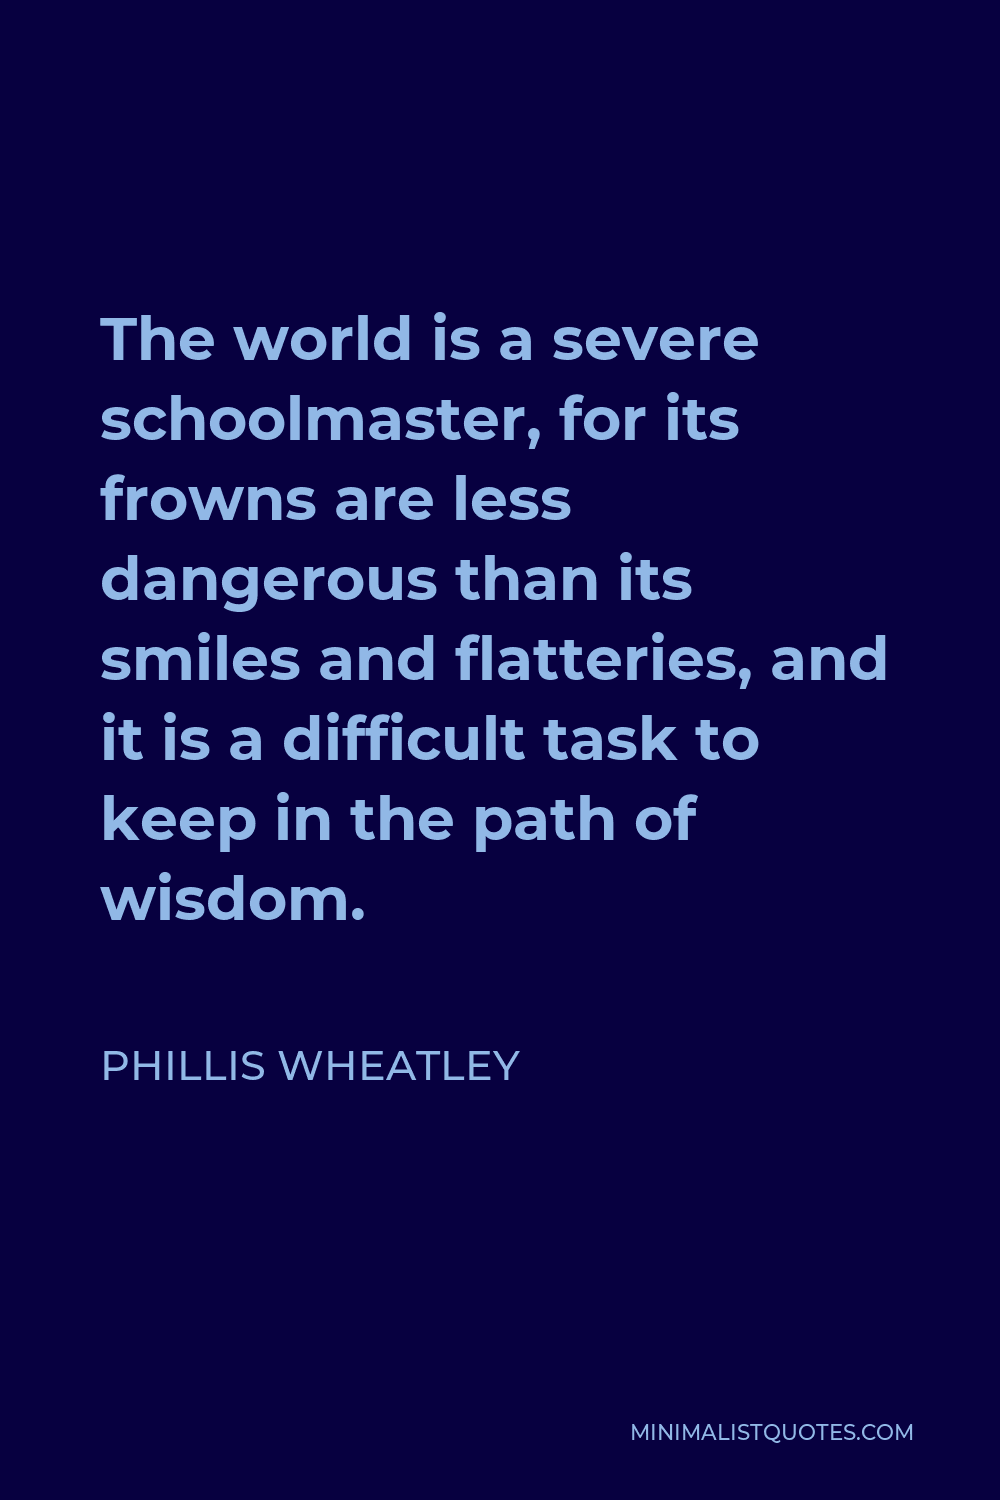 Phillis Wheatley Quote - The world is a severe schoolmaster, for its frowns are less dangerous than its smiles and flatteries, and it is a difficult task to keep in the path of wisdom.